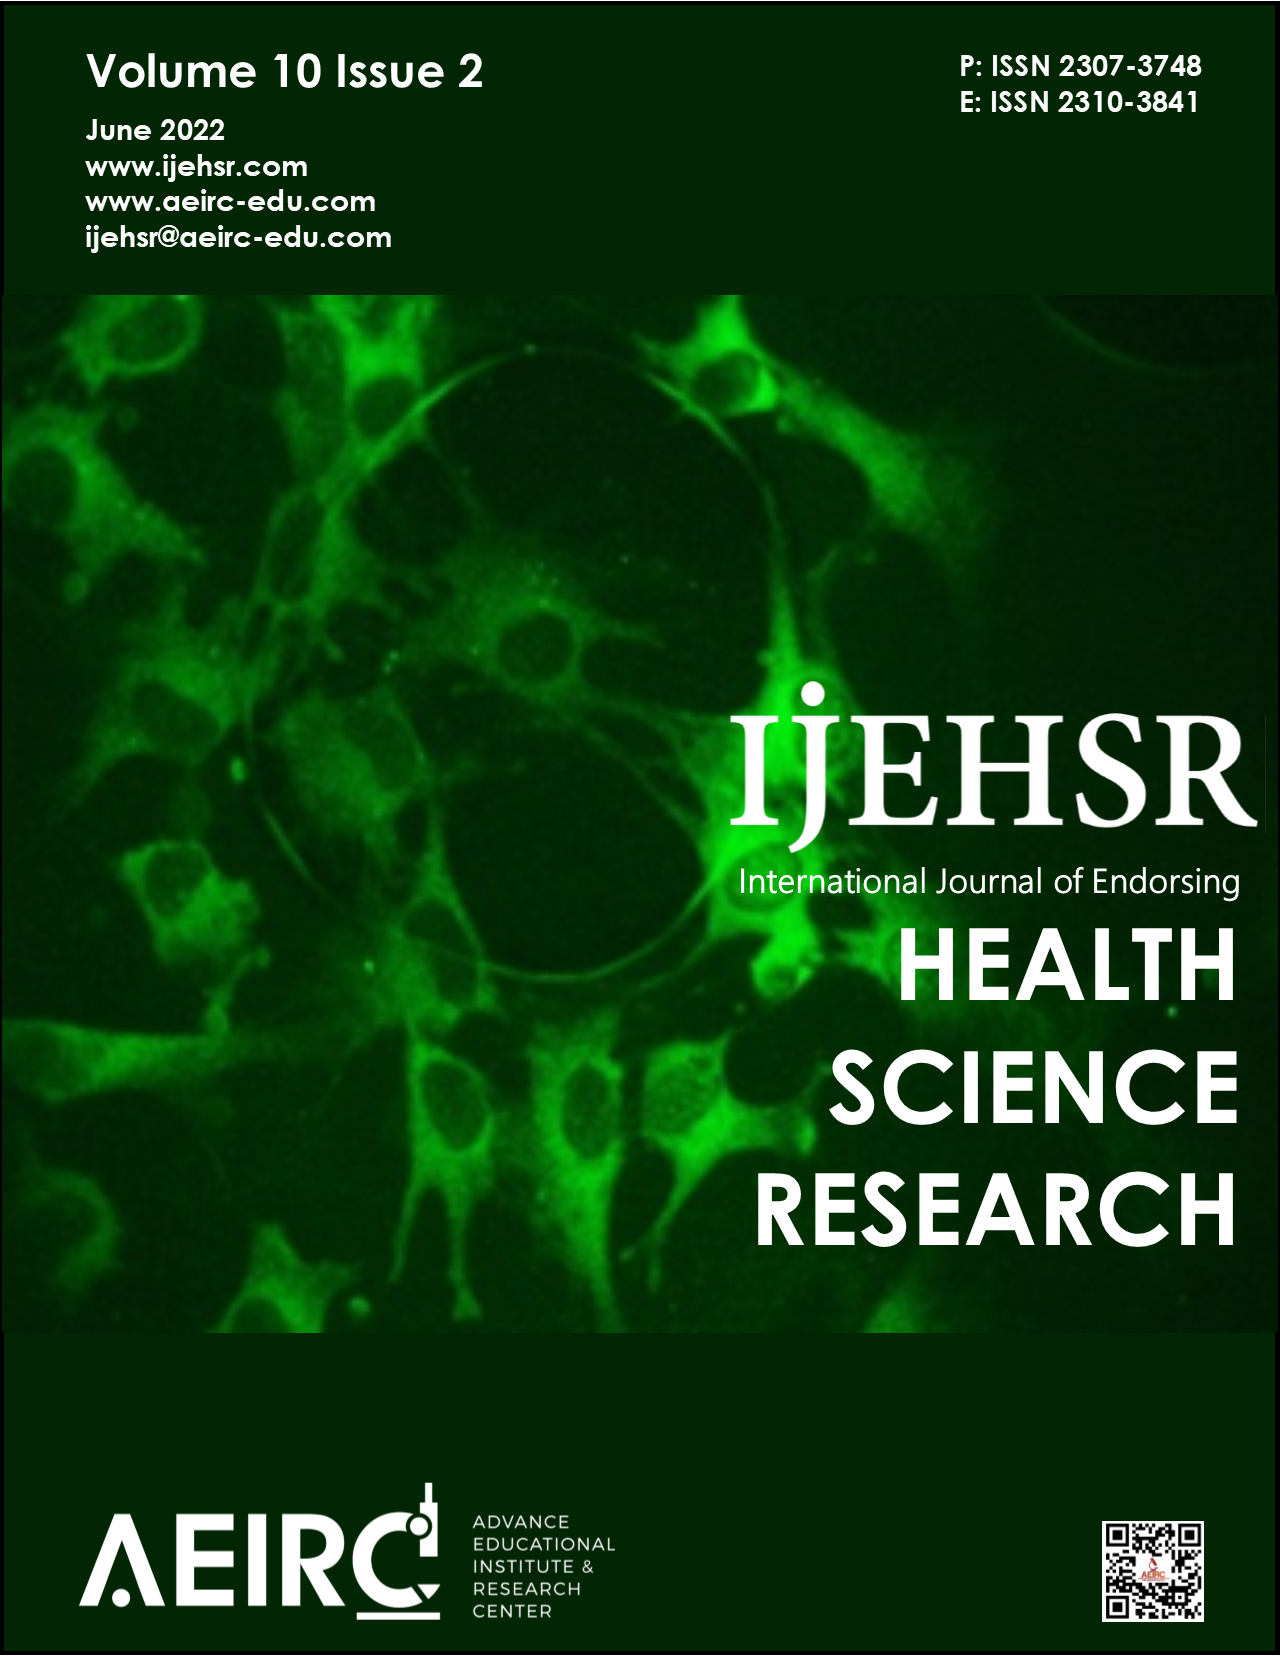 					View Vol. 10 No. 2 (2022): International Journal of Endorsing Health Science Research
				